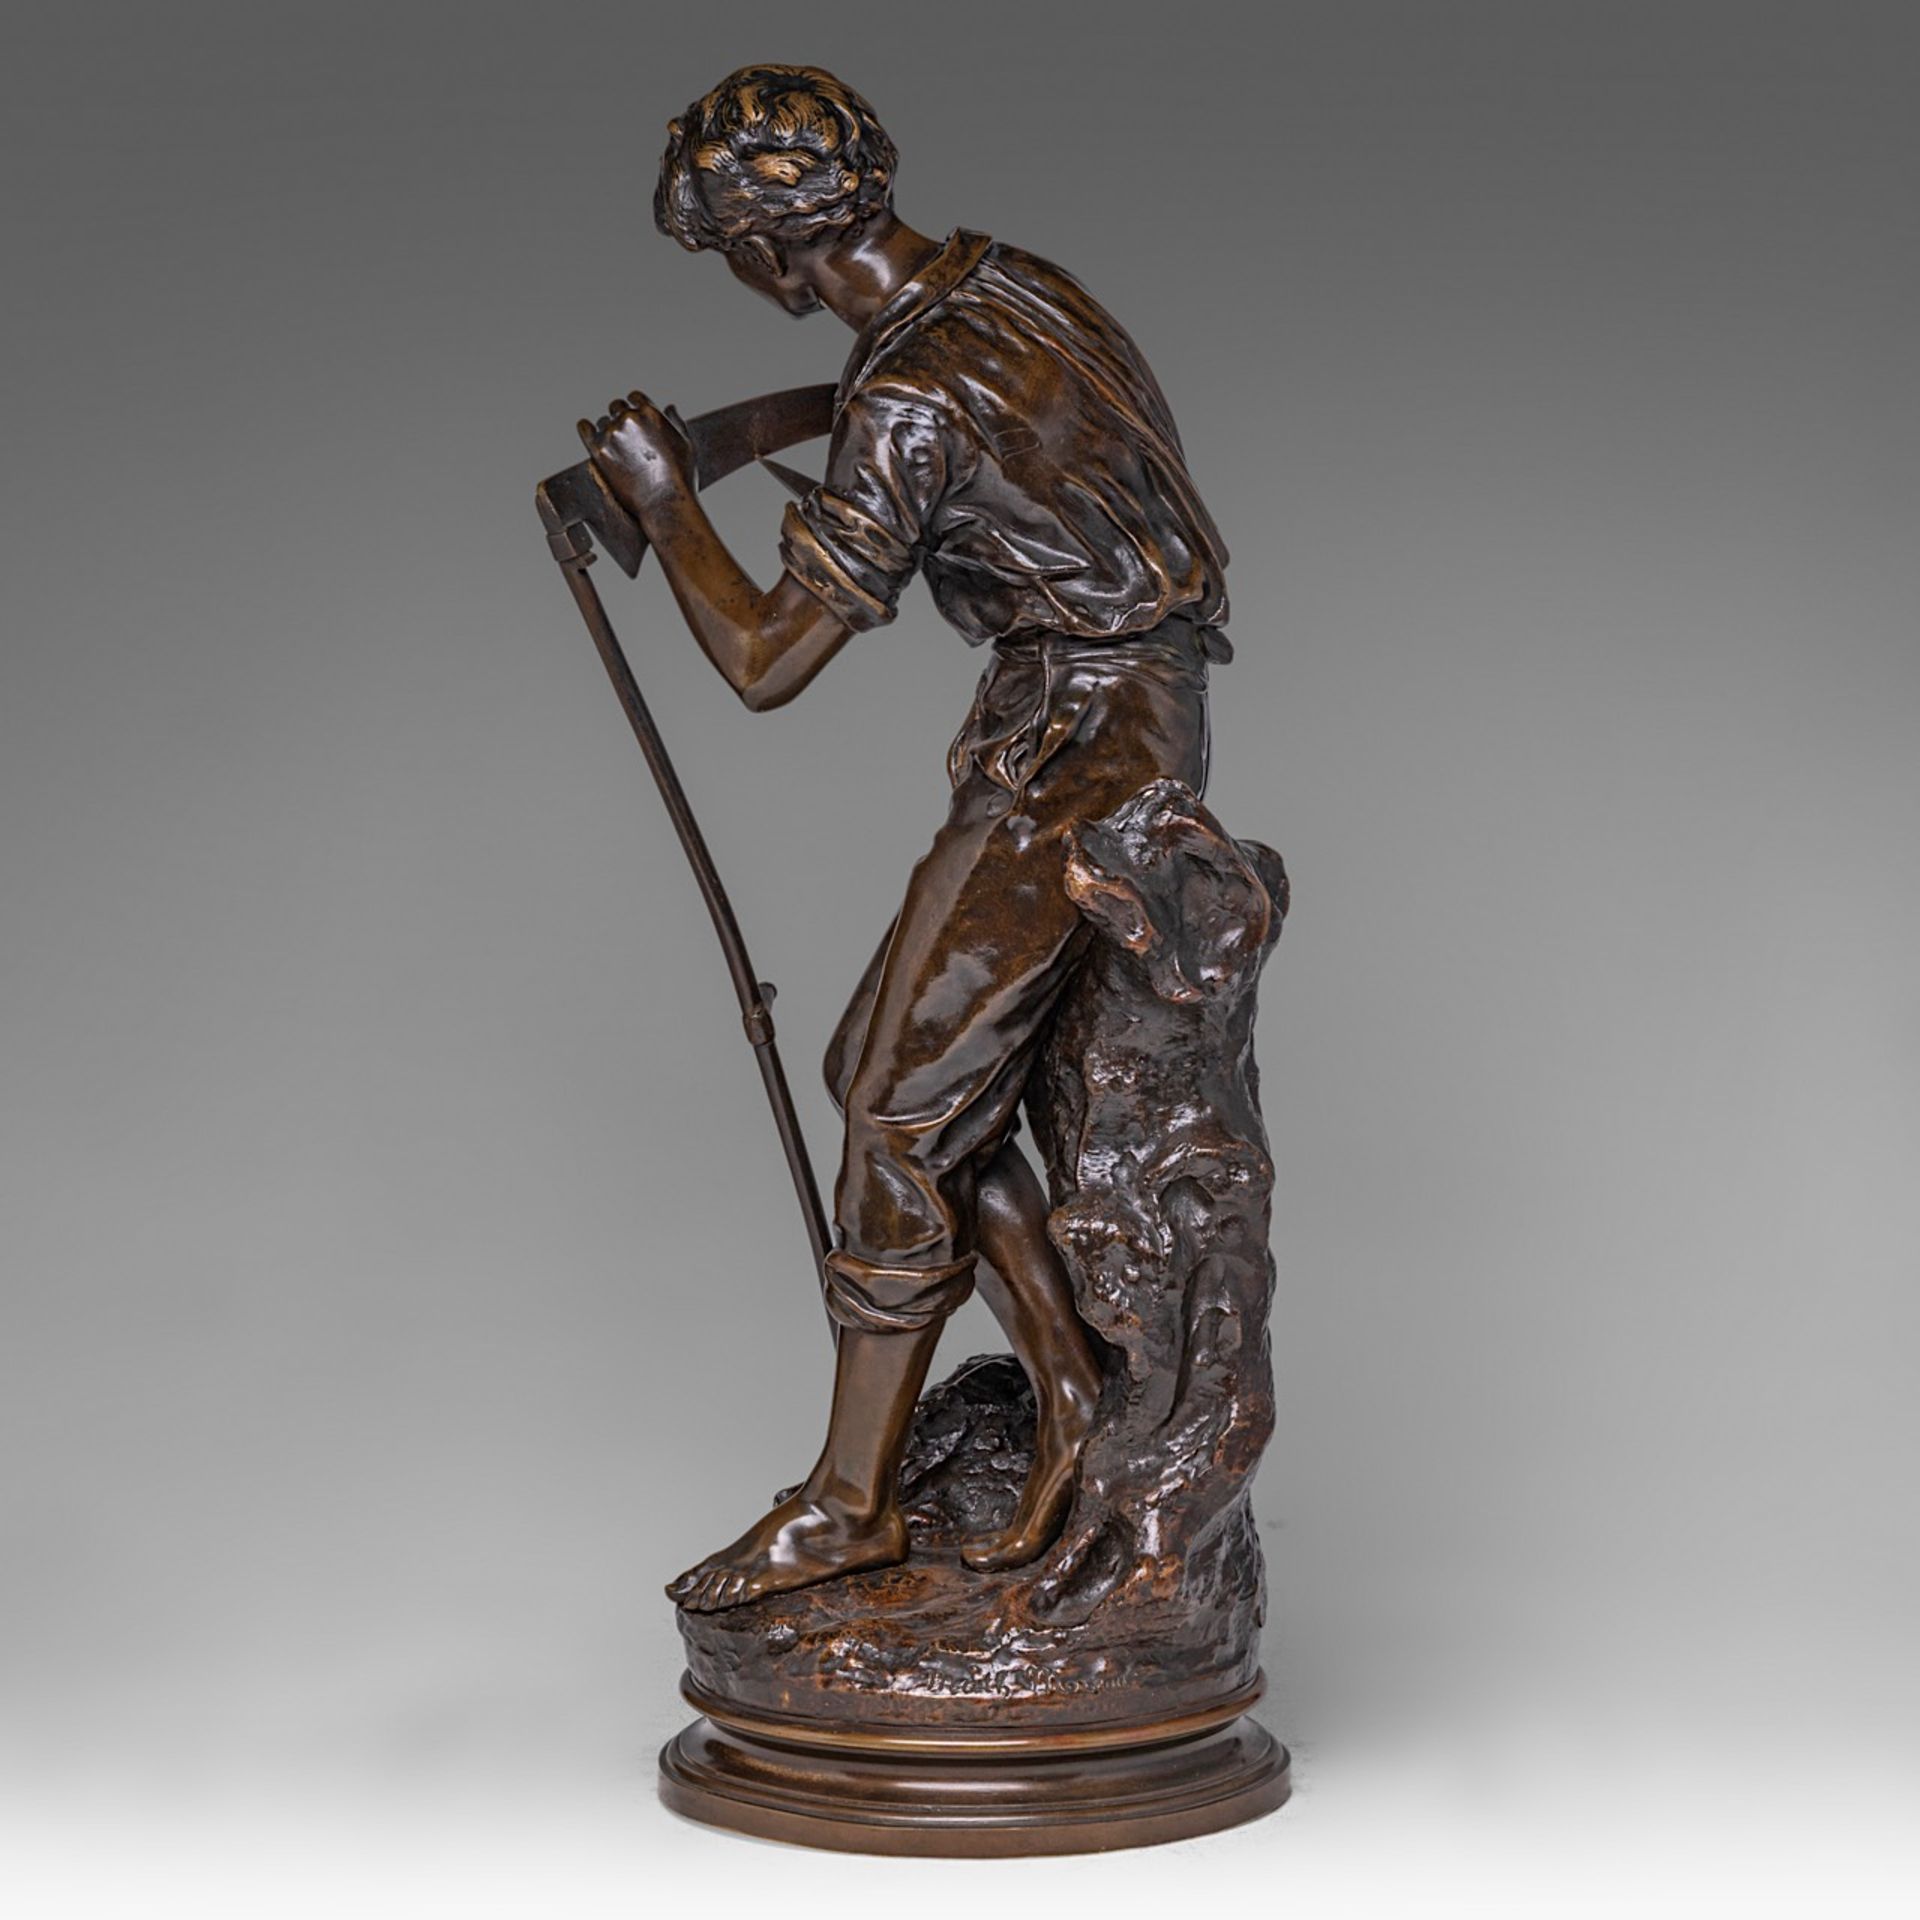 Mathurin Moreau (1822-1912), boy with scythe, patinated bronze, H 62 cm - Image 3 of 7